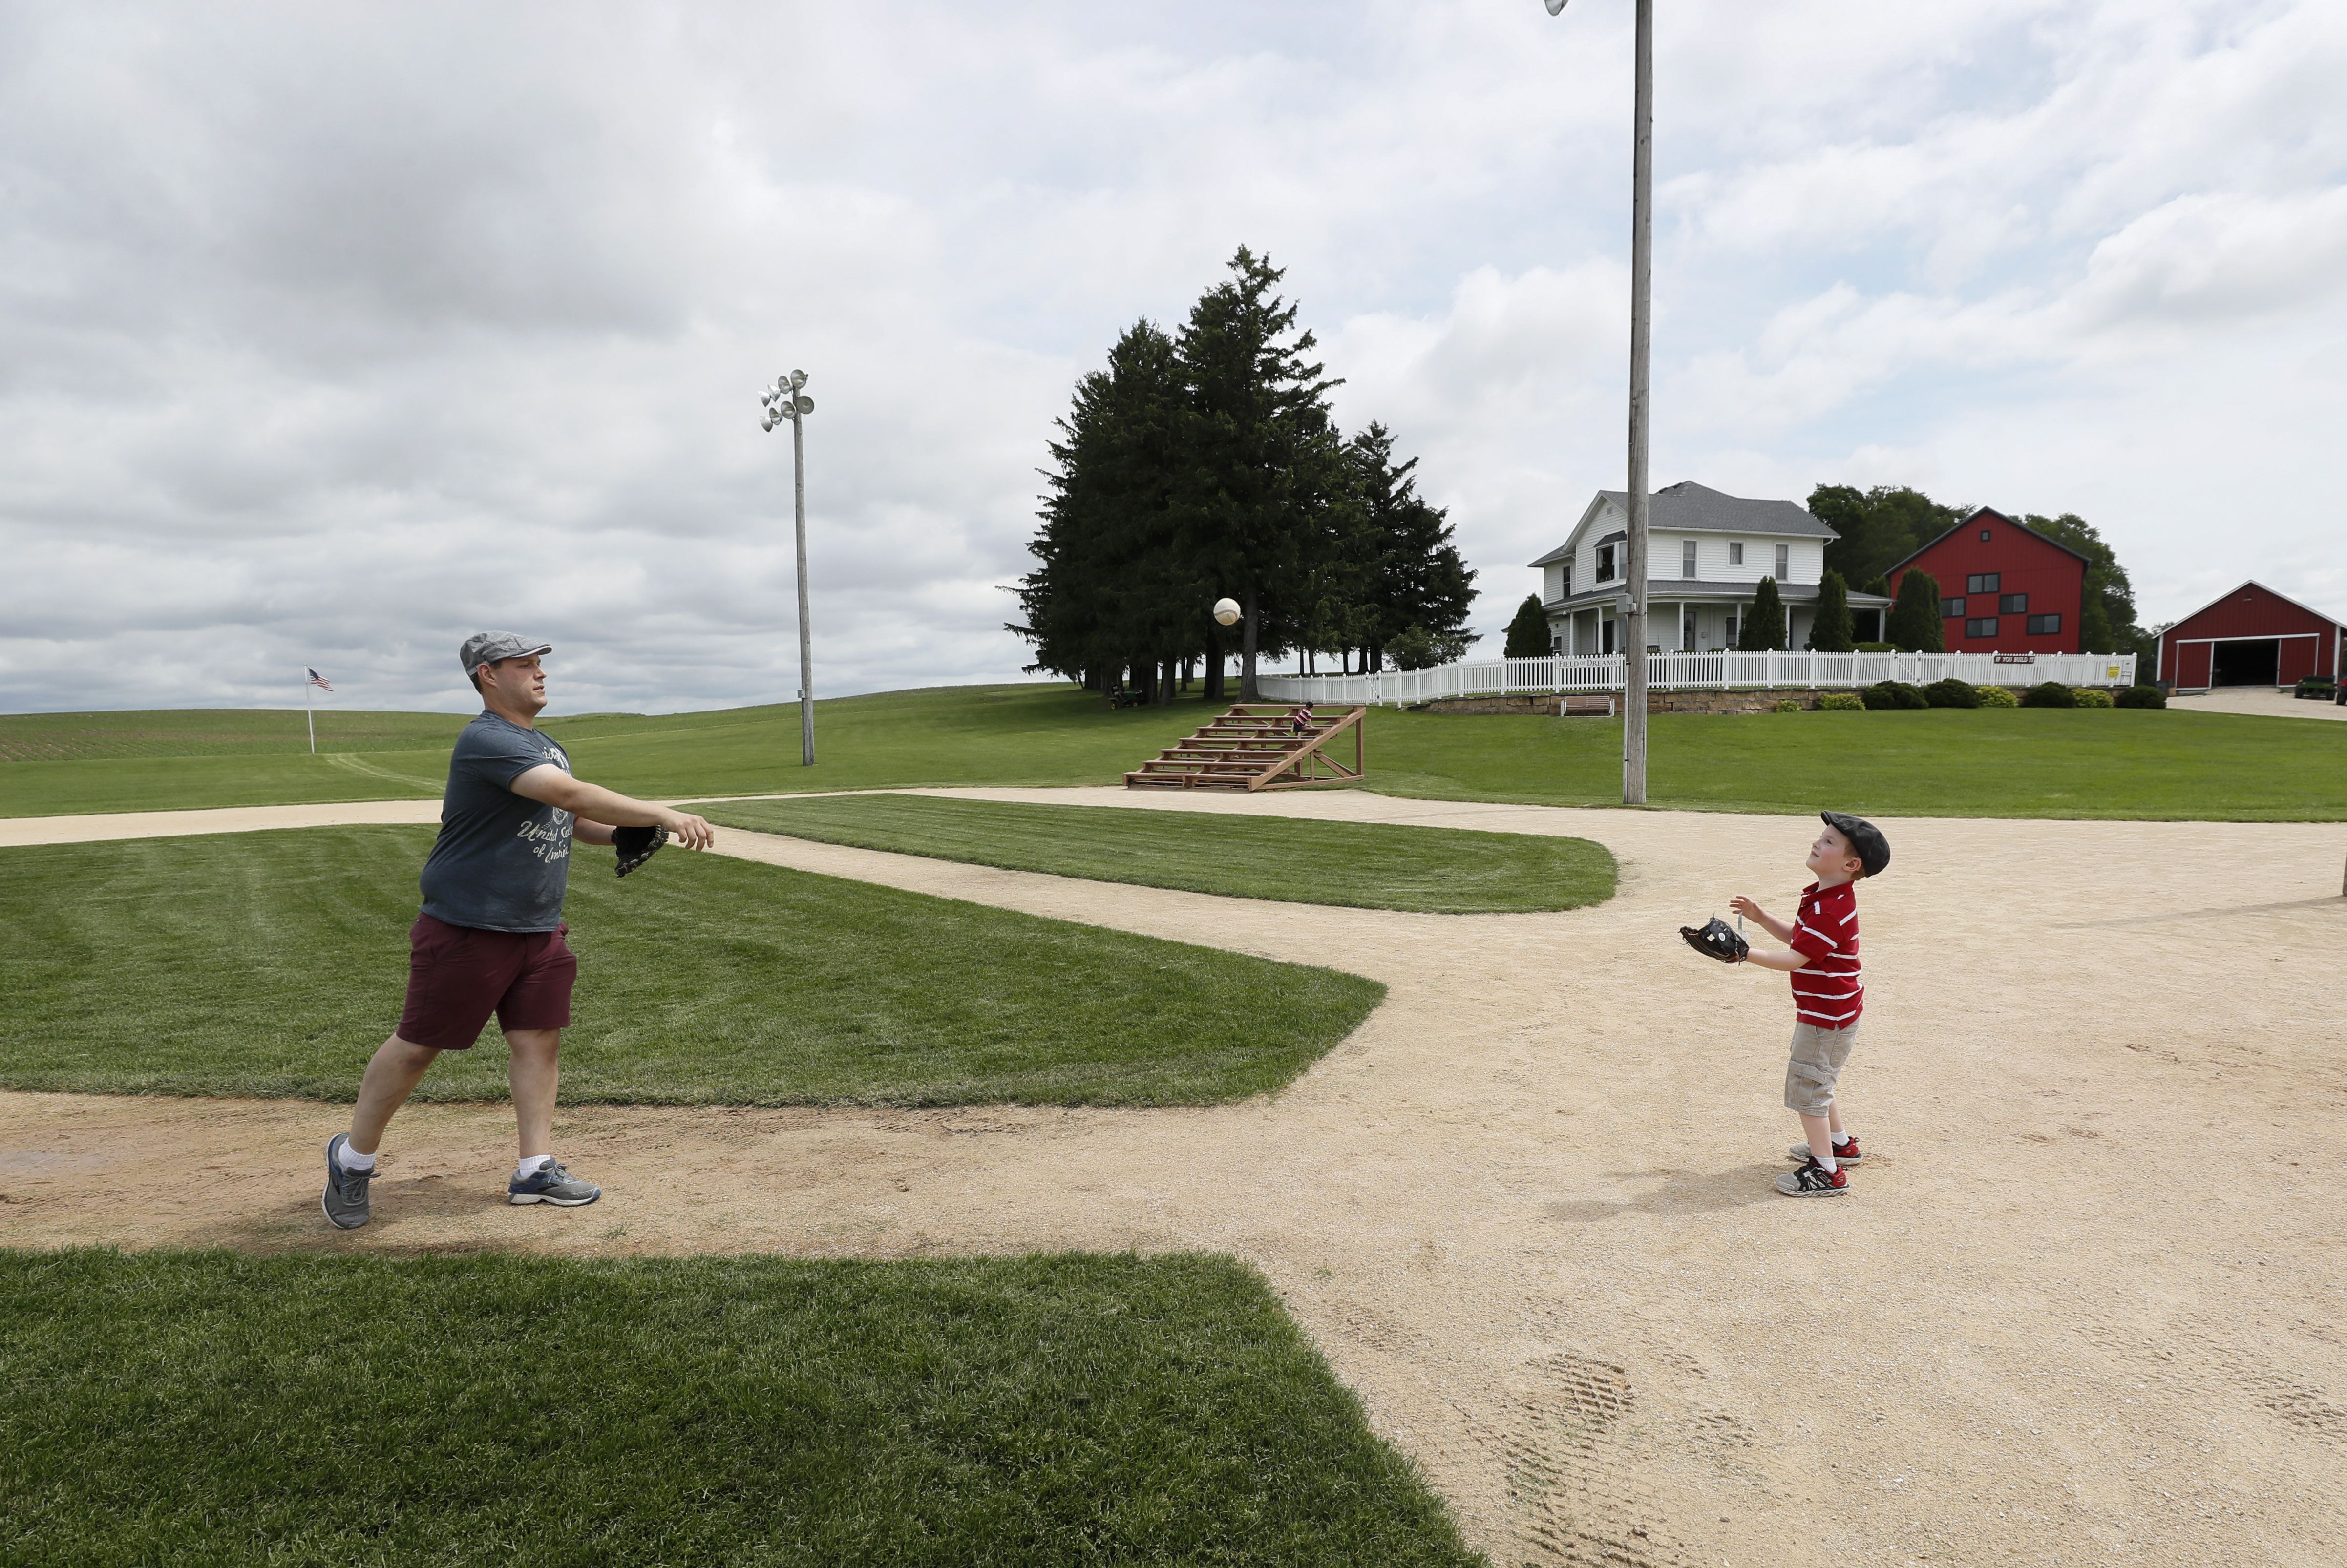 MLB commissioner says there'll be a Field of Dreams game in Iowa